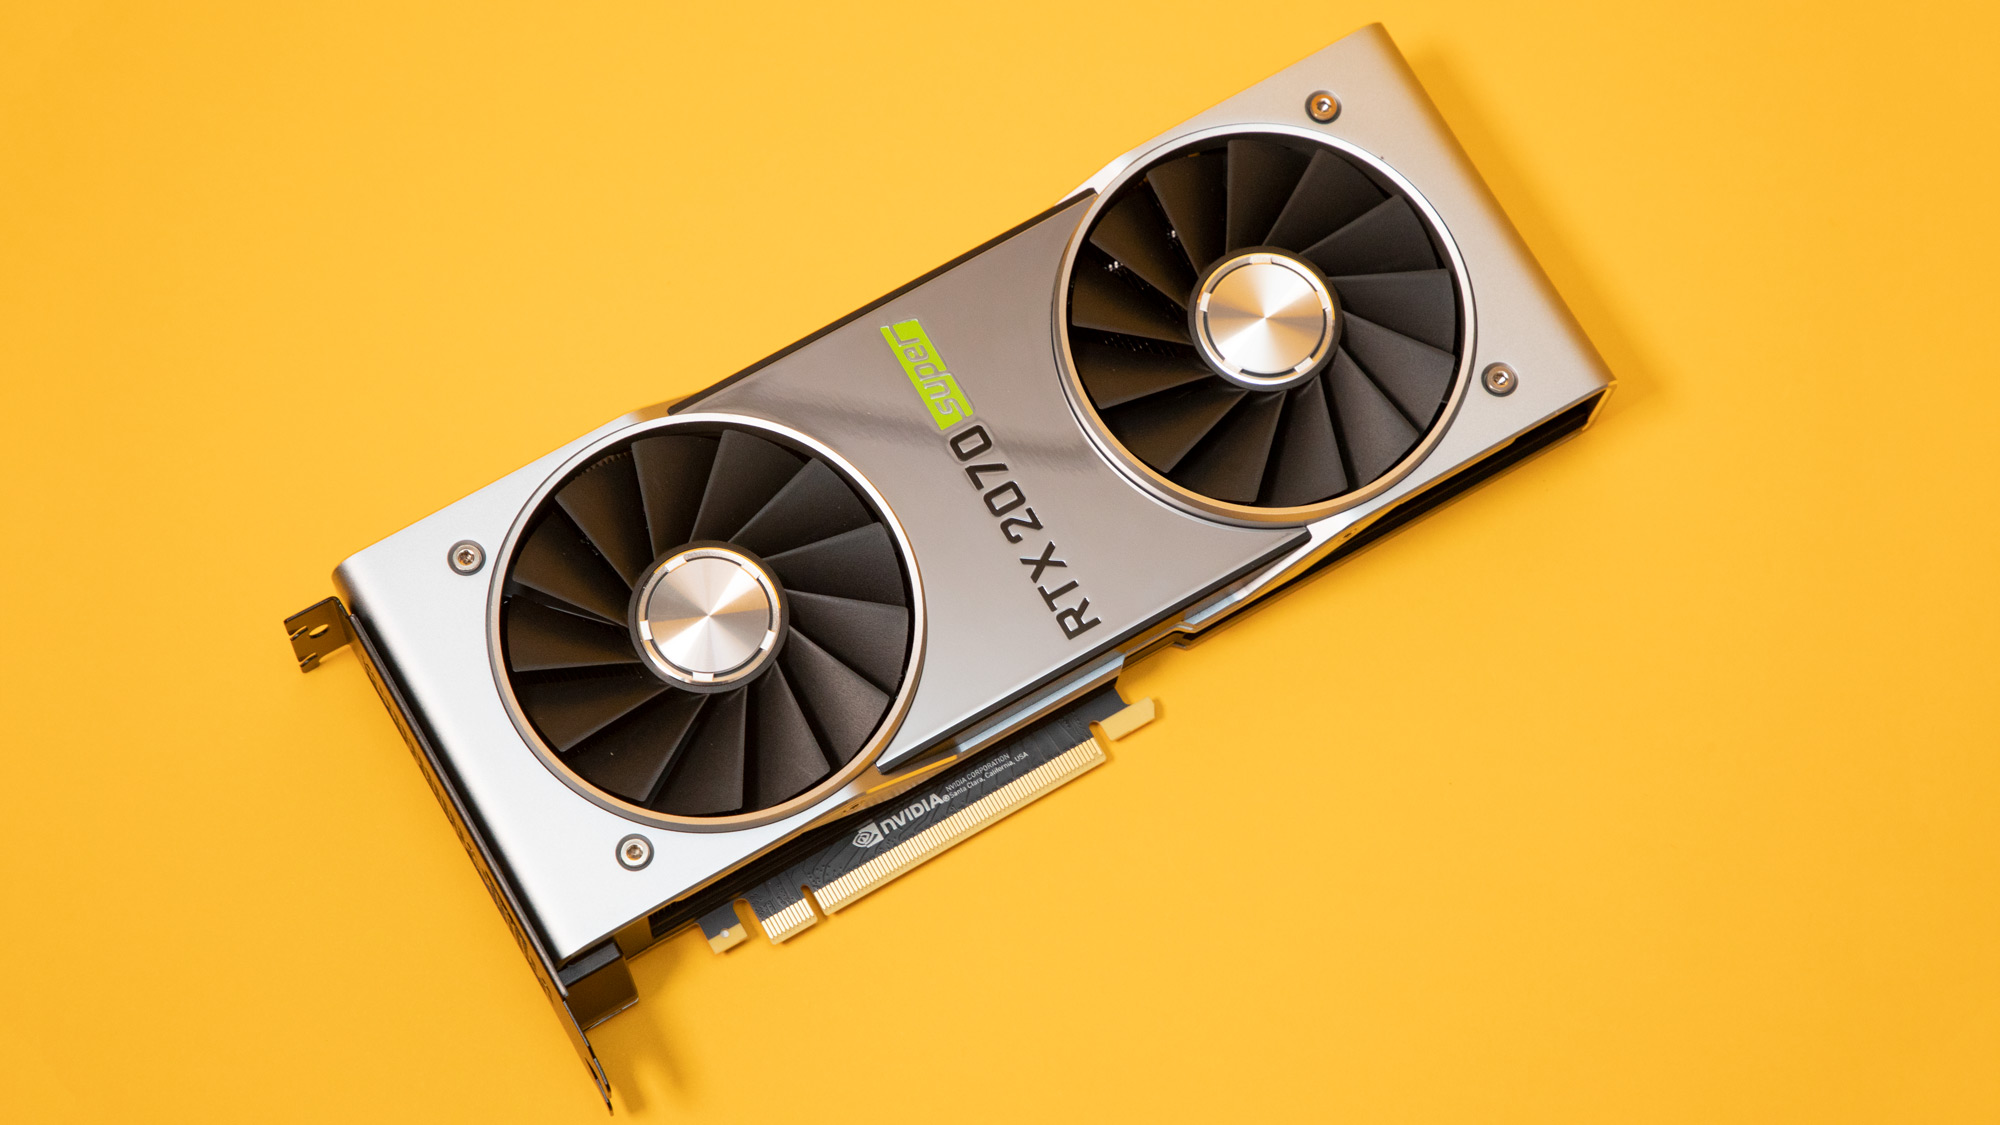 Best 1080p Graphics Cards 2020: The 